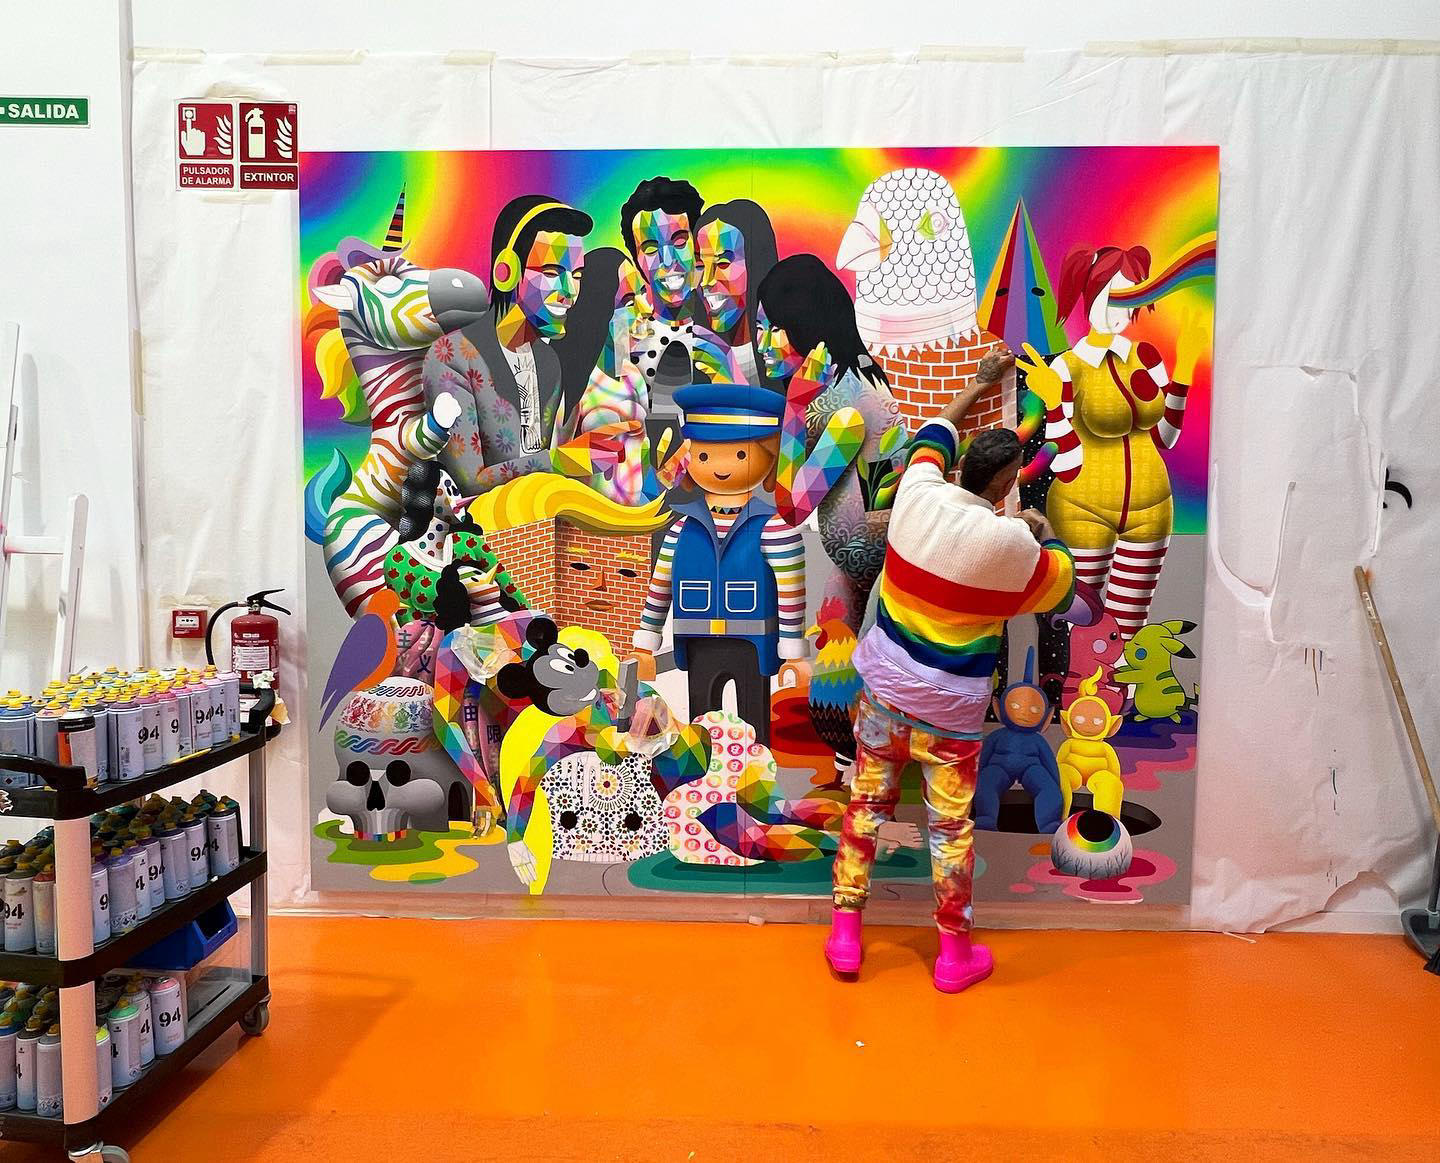 OKUDA SAN MIGUEL - Last day of the year working in the studio